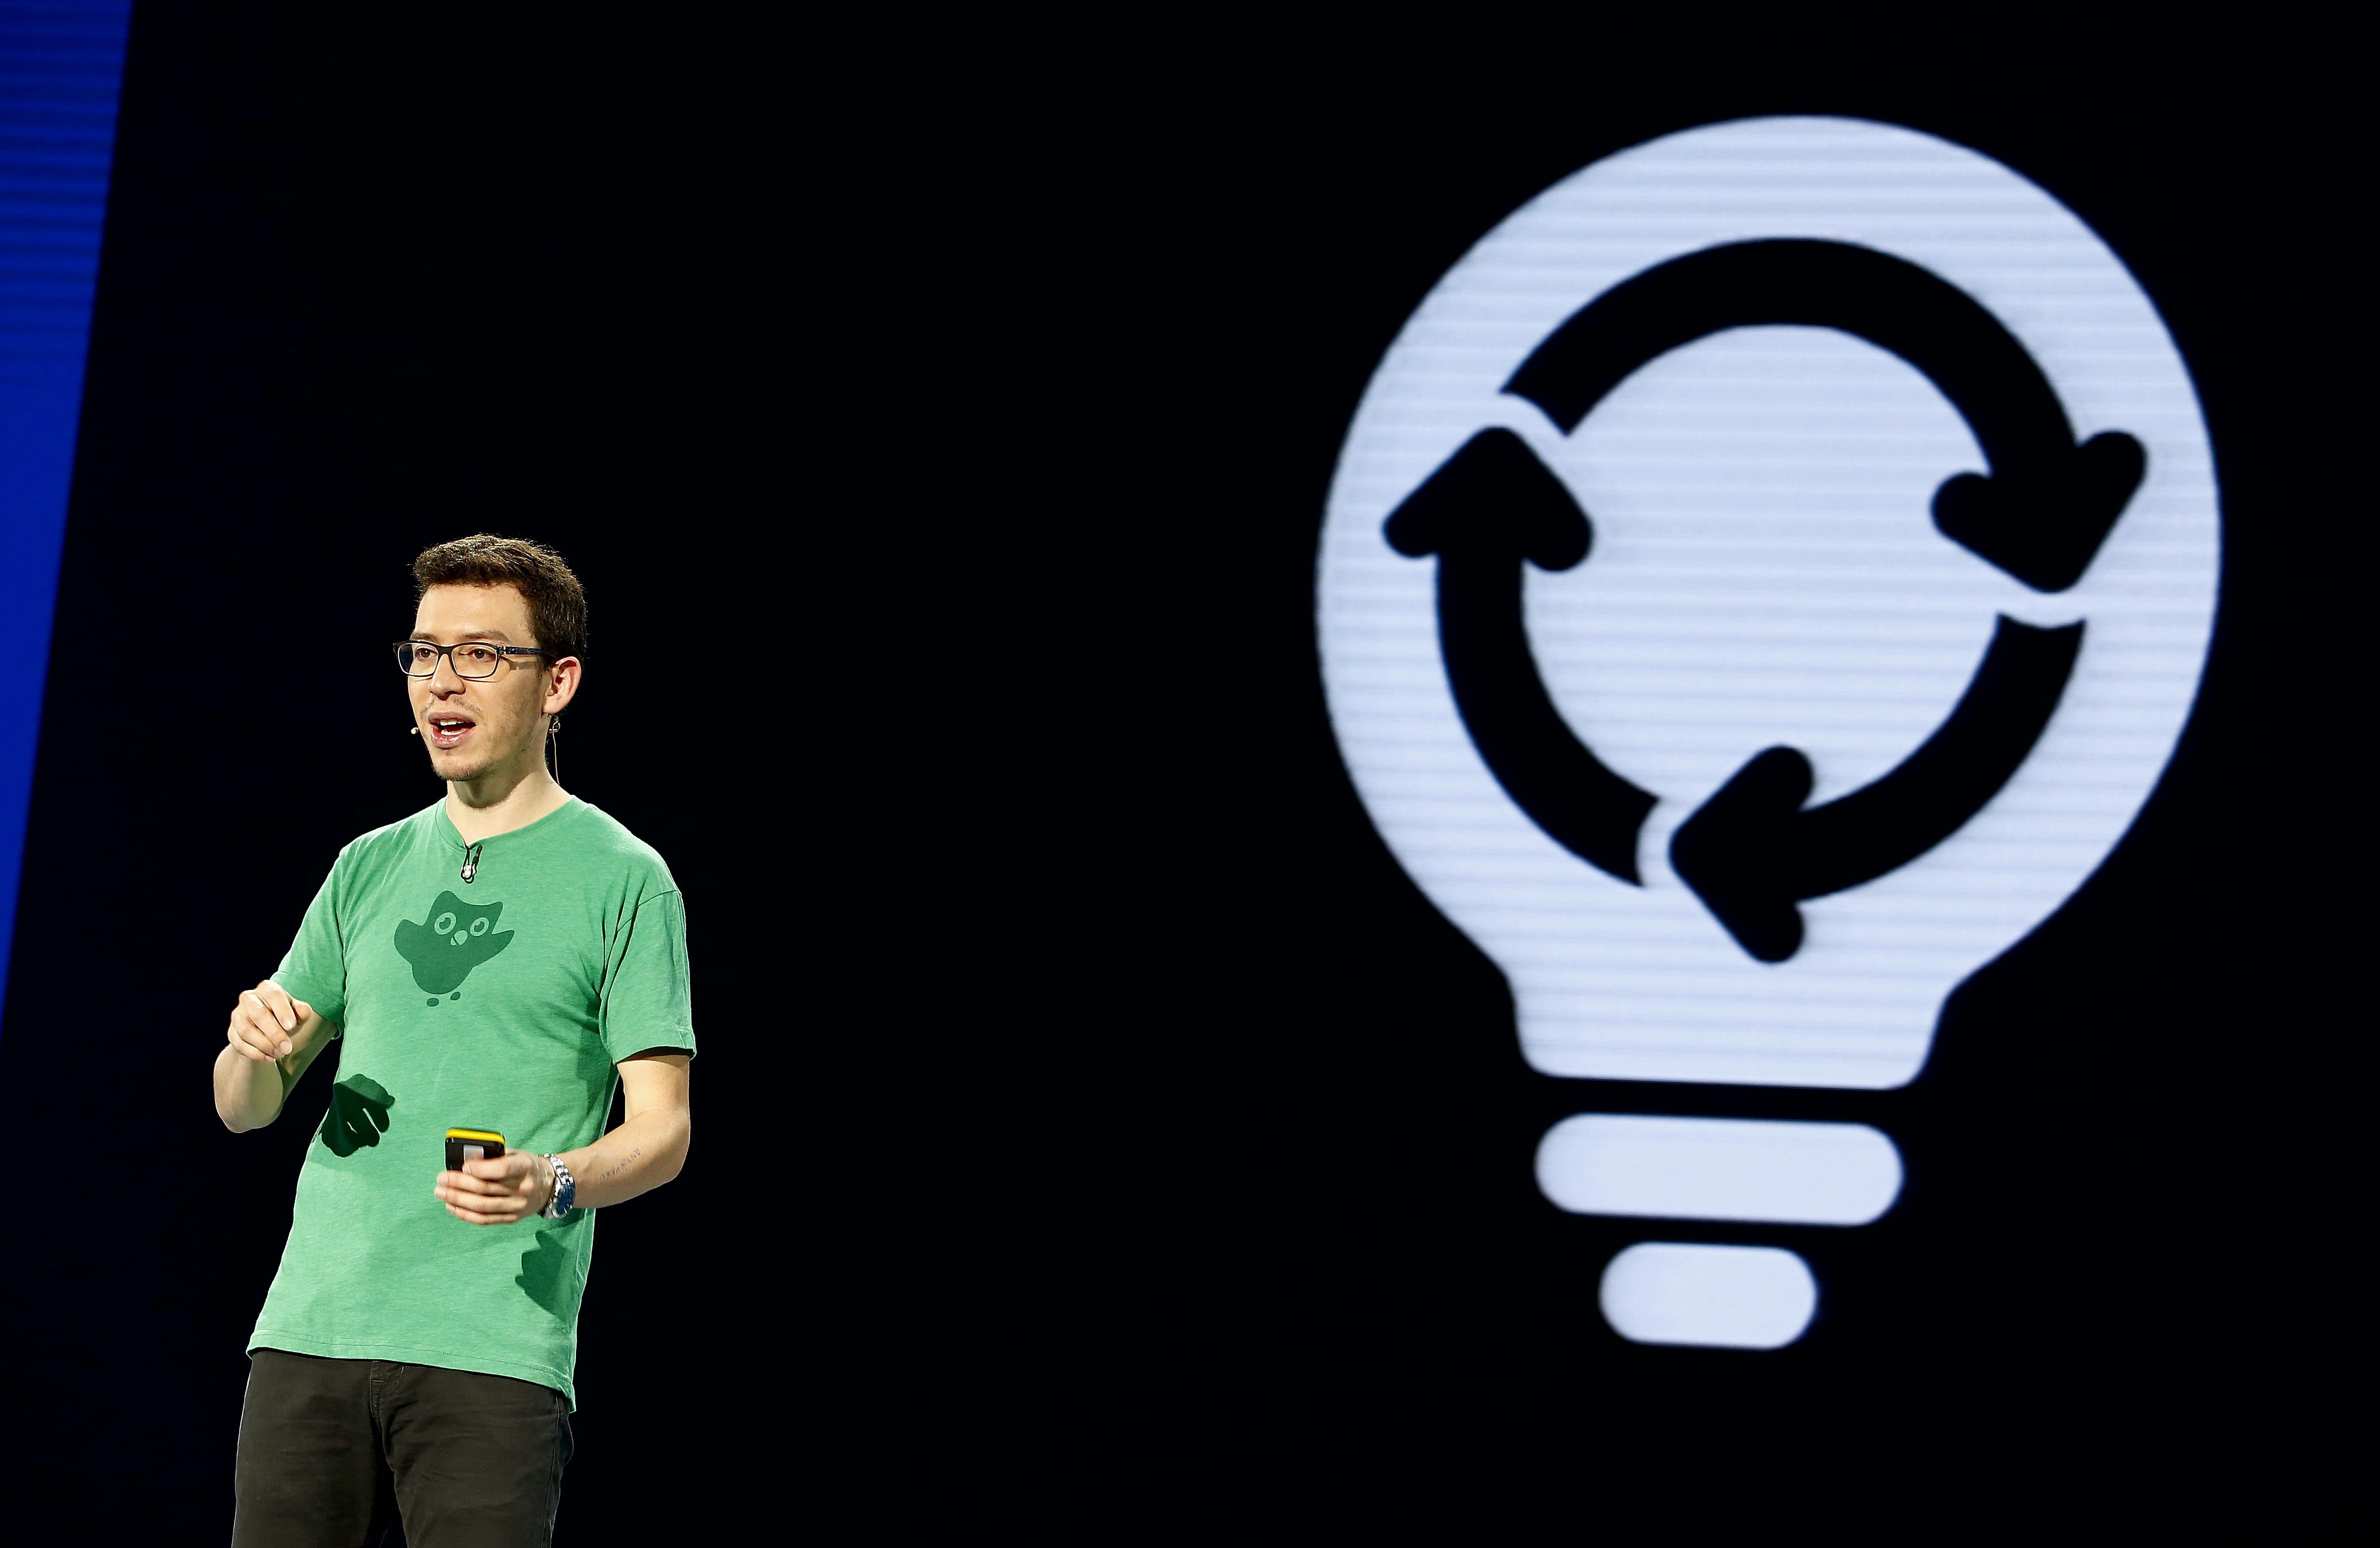 Guatemalan Luis von Ahn, Co-founder and CEO of Duolingo, and inventor of CAPTCHA and reCAPTCHA, speaks about 'The Beginning of New TIME: Key 2, Capture' during the opening ceremony of the Seoul Digital Forum in Seoul, South Korea on May 21, 2014. (Jeon Heon Kyun—EPA)